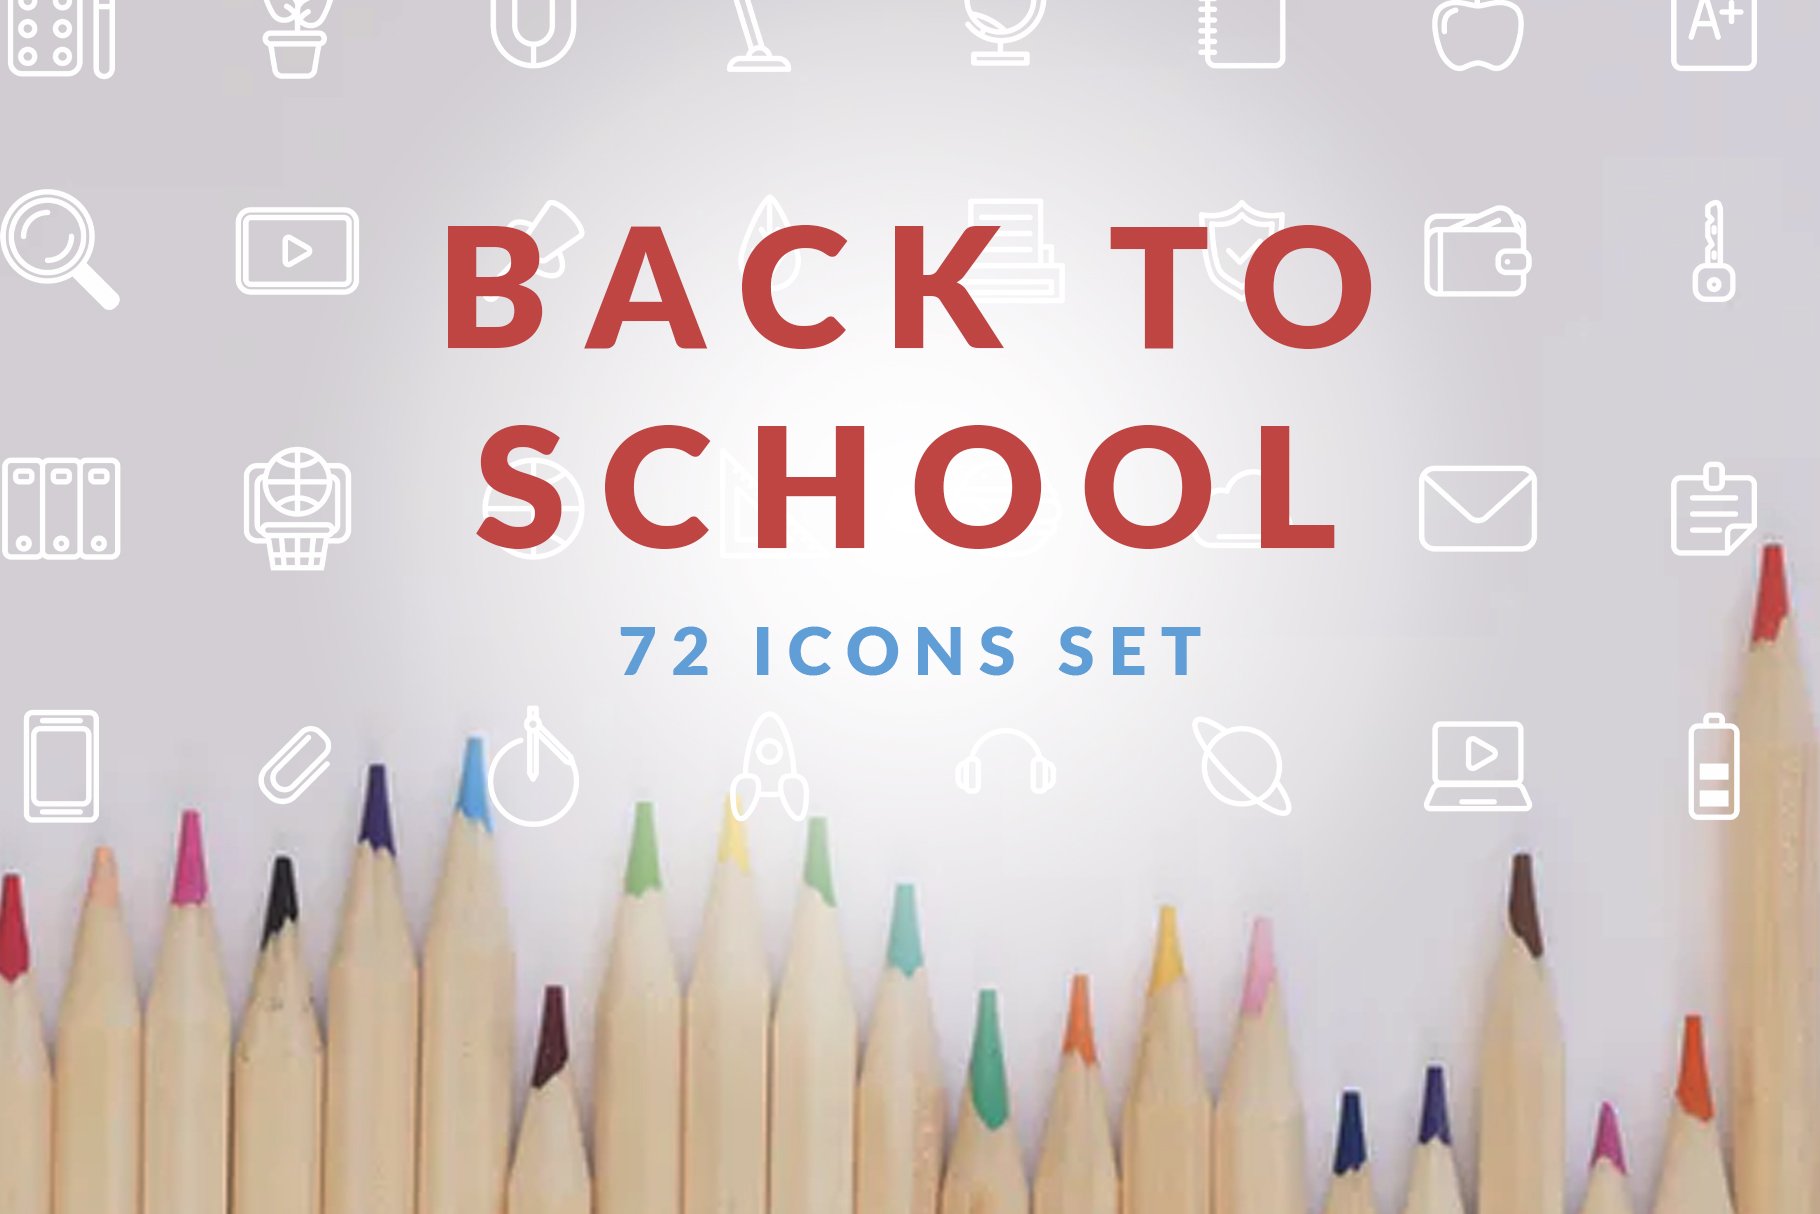 Back to School Icons set cover image.